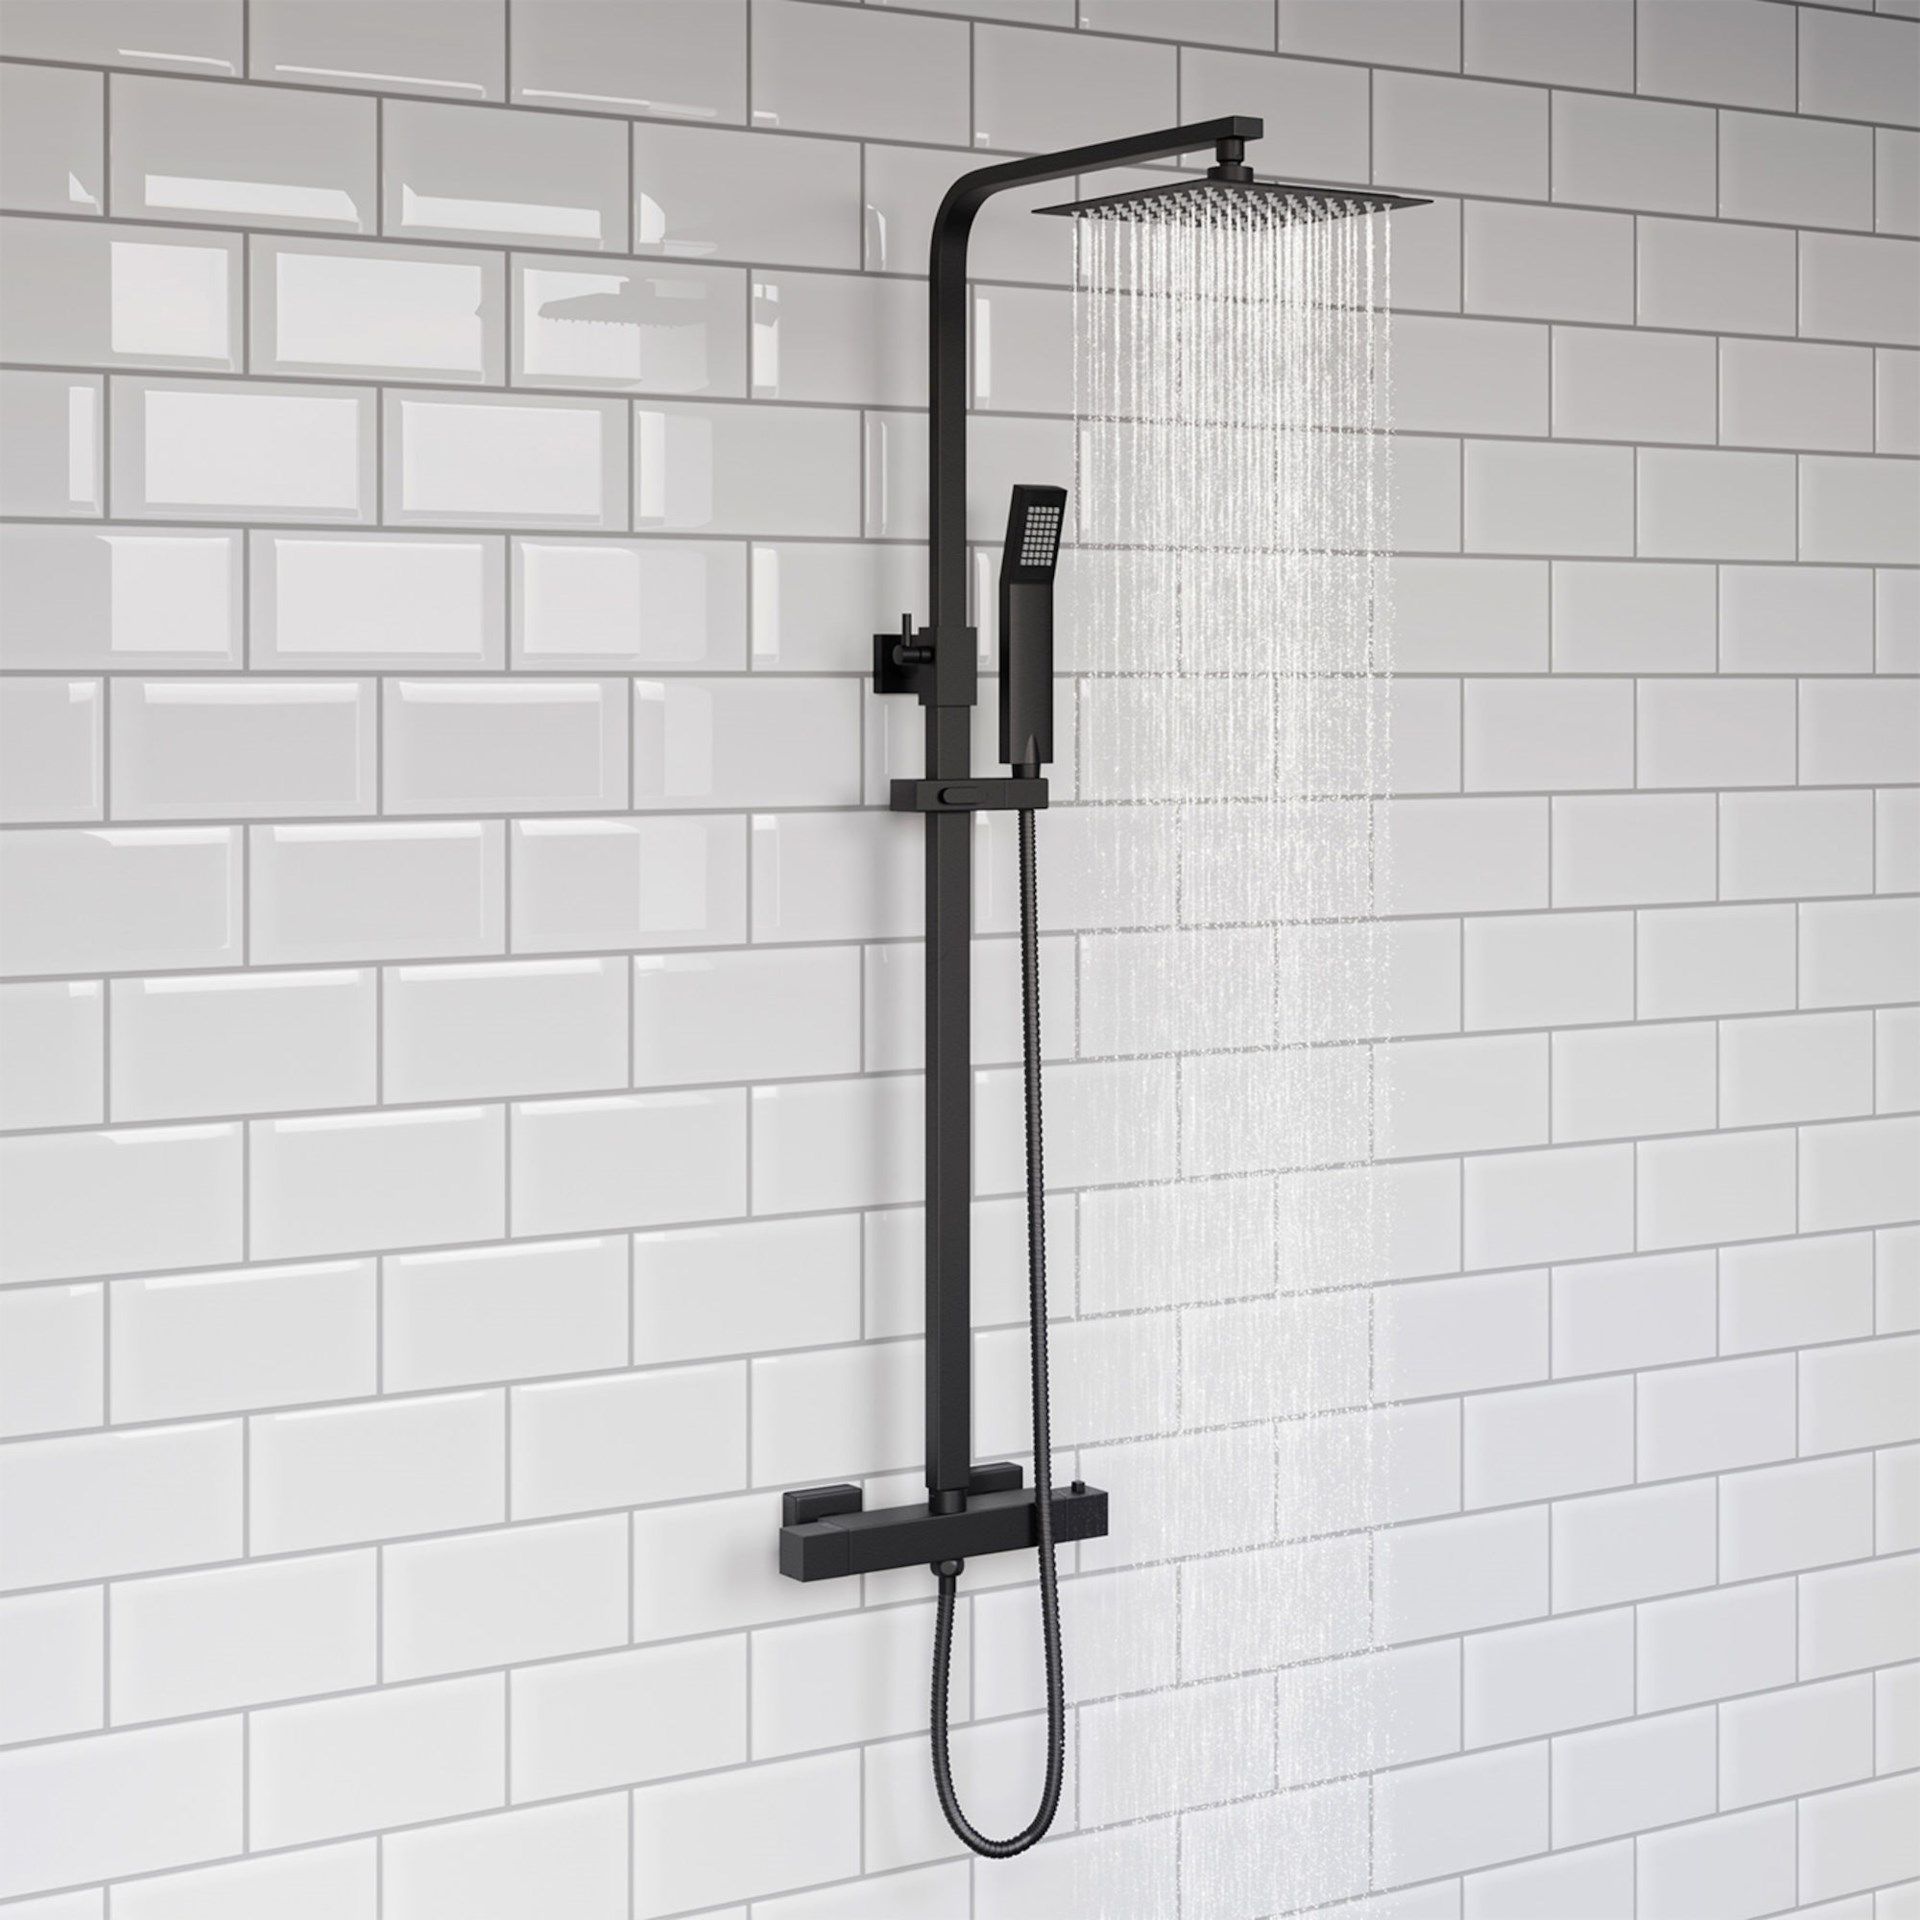 (LV45) Matte Black Square Exposed Thermostatic Shower Set. RRP £399.99. Contemporary matte fin...